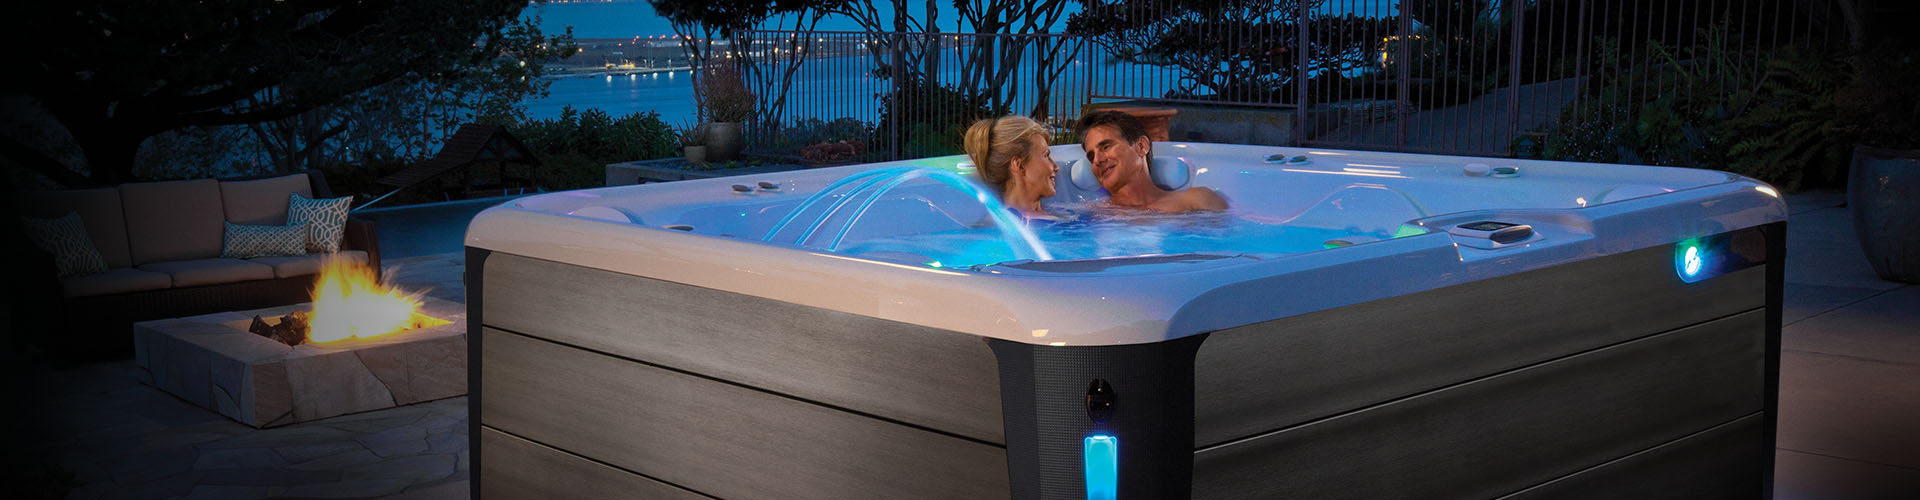 The Highlife® Collection from Hot Spring Spas: Luxury Hot Tubs For Those Who Expect the Most Out of Life